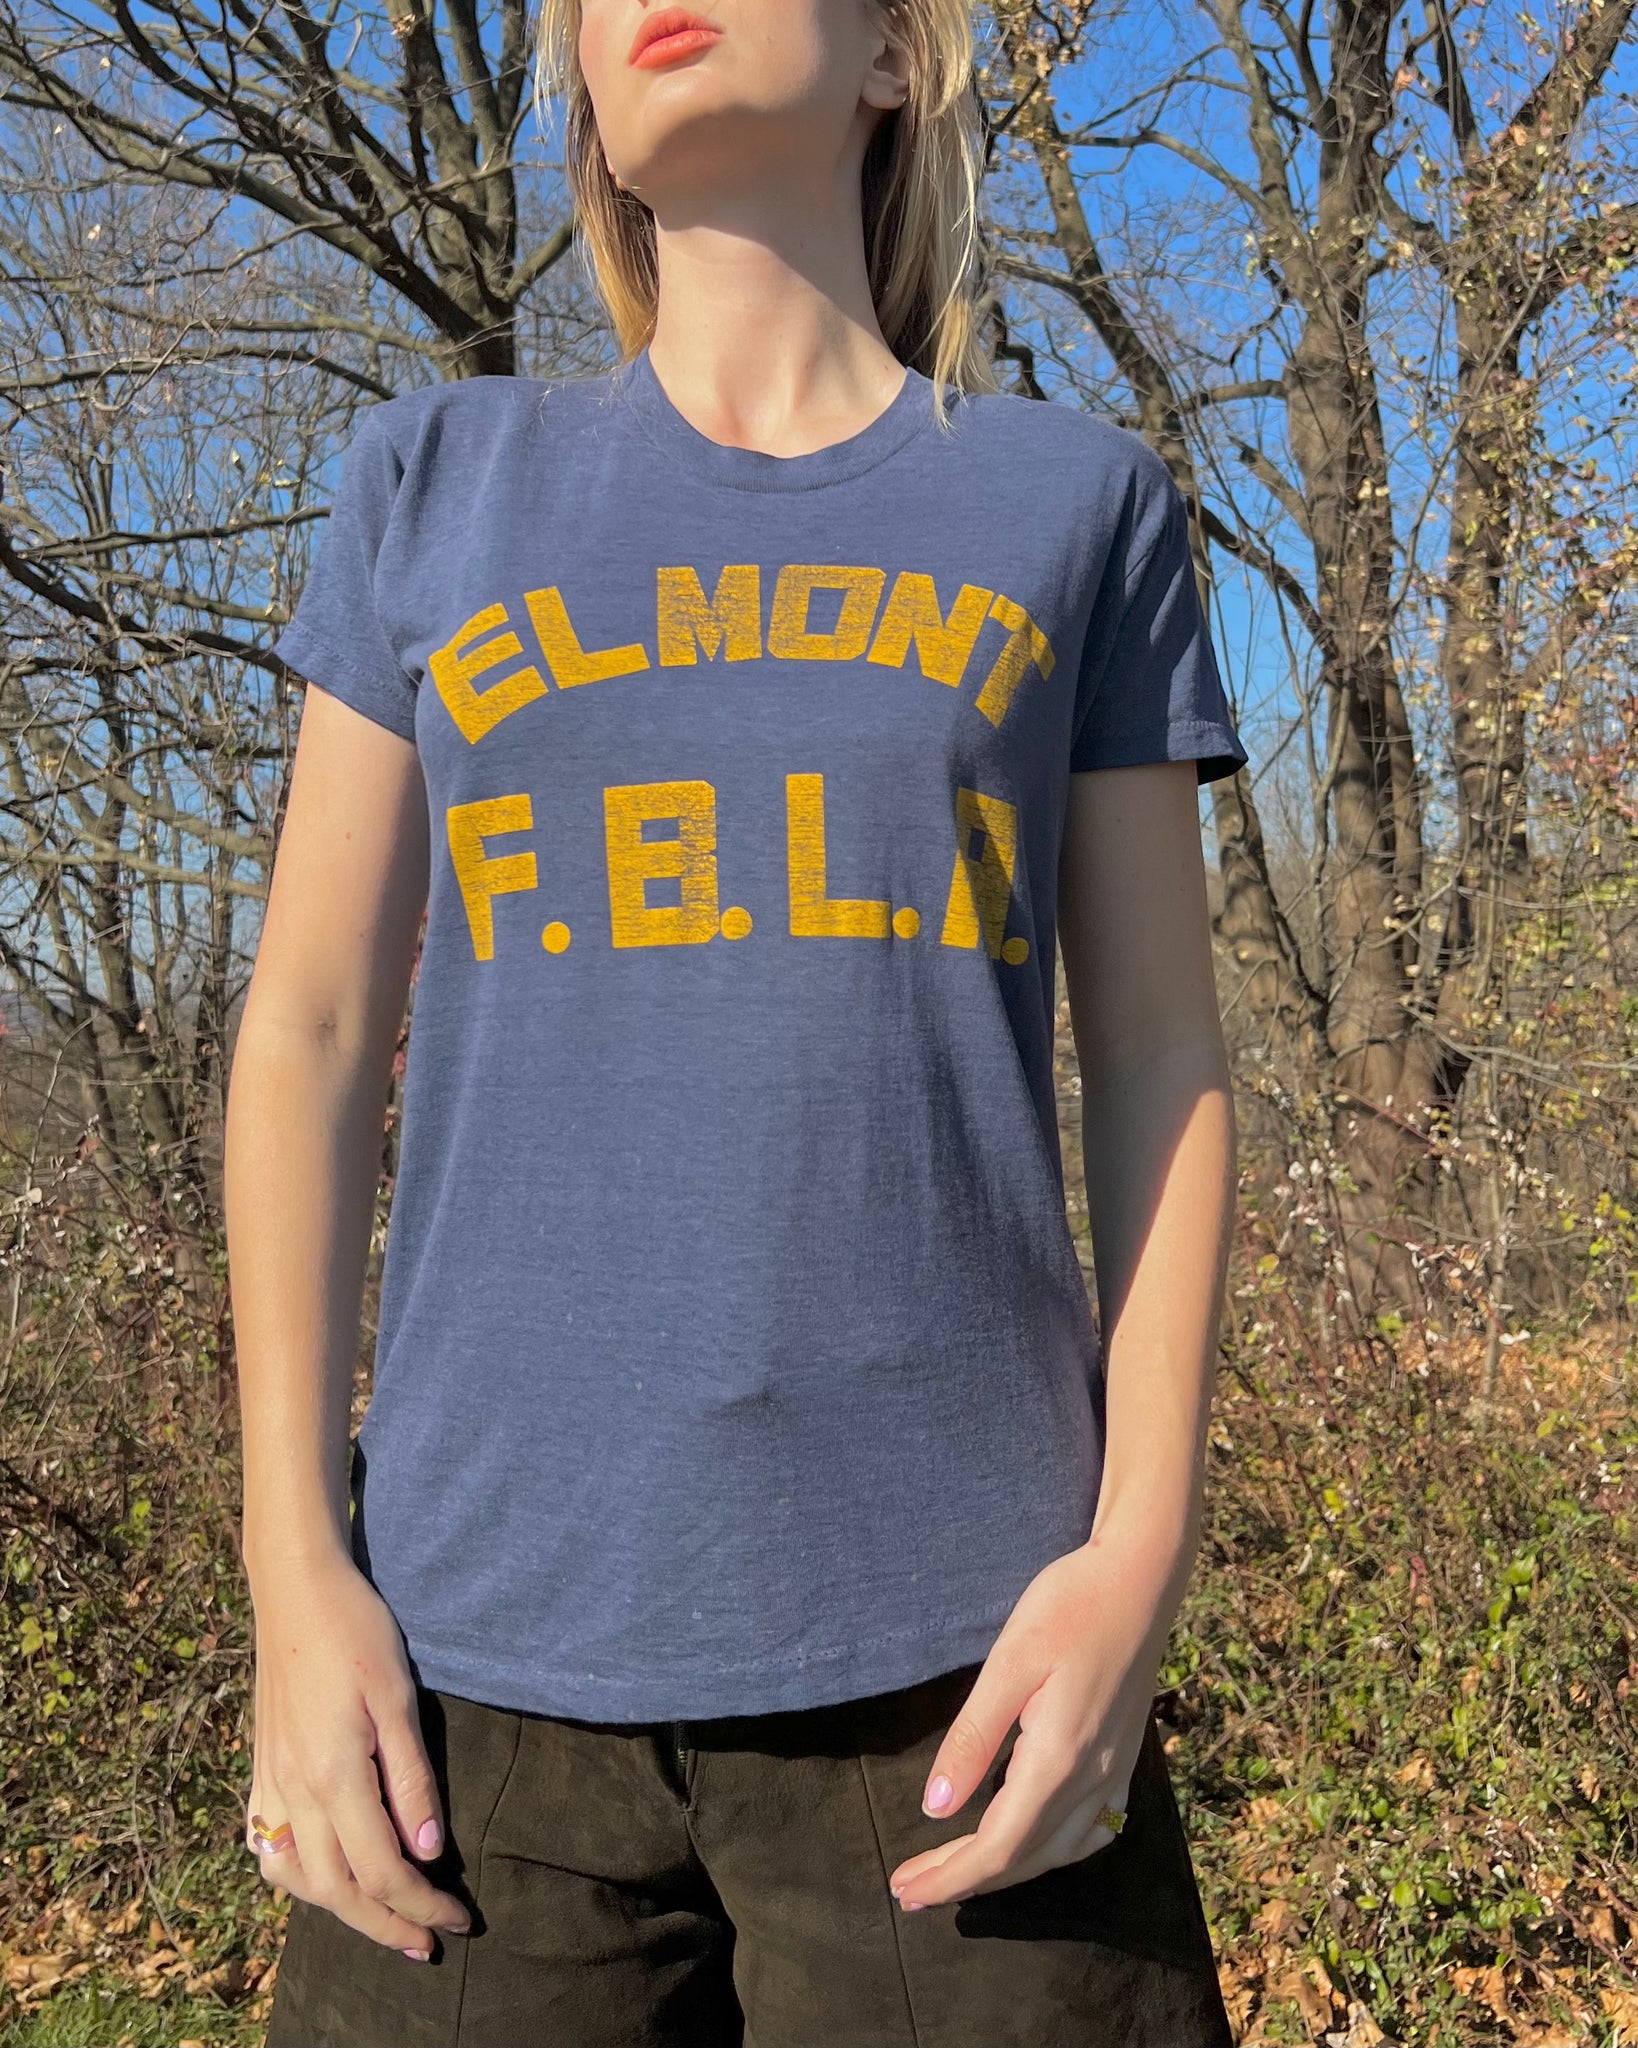 1970s Paper Thin Cotton Navy Blue and Mustard Graphic “ELMONT FBLA” T-Shirt